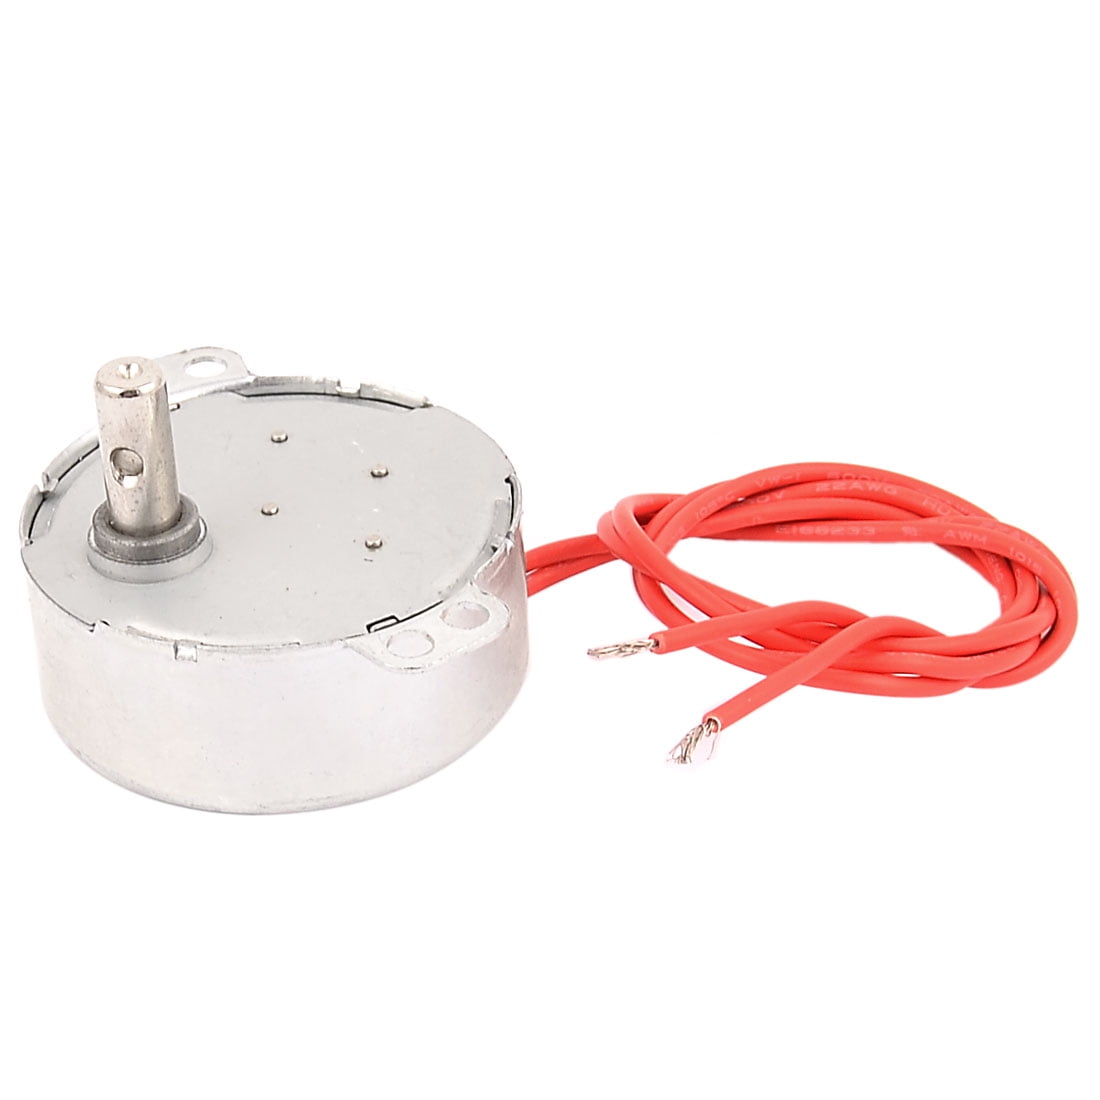 AC 100-127V Synchronous Motor 2.5-3RPM 50/60Hz CW/CCW 4W Torque For Microwave US 